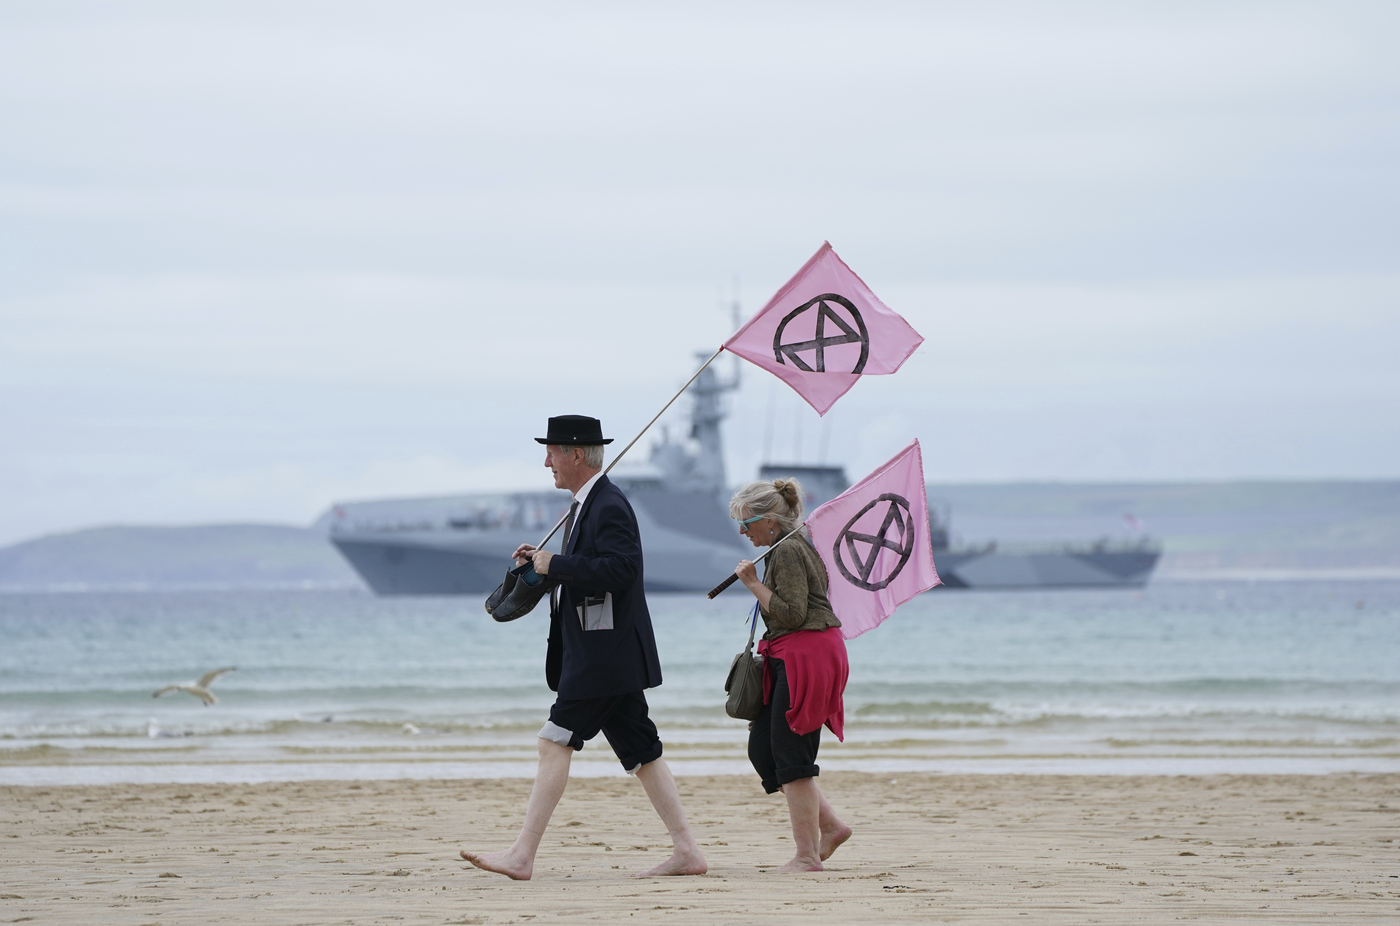 Two protestors holds flags as they walk on the beach of Carbis Bay during a demonstration outside the G7 meeting taking place in St. Ives, Cornwall, England, Friday, June 11, 2021. Leaders of the G7 begin their first of three days of meetings on Friday in Carbis Bay, in which they will discuss COVID-19, climate, foreign policy and the economy. (AP Photo/Jon Super)